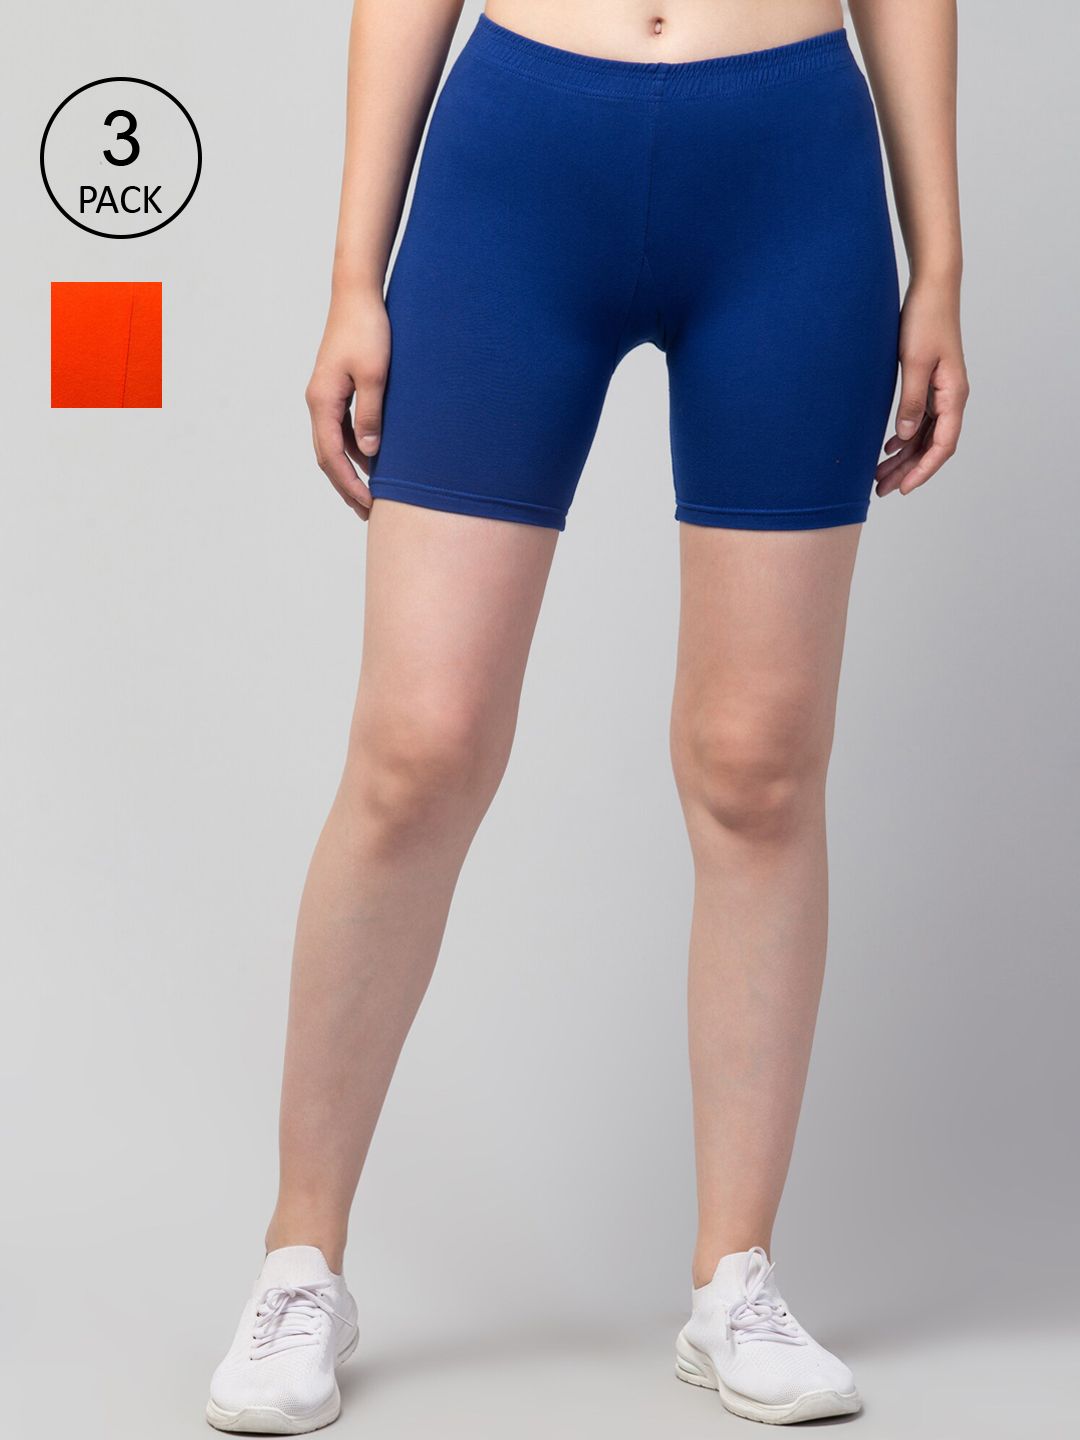 Apraa & Parma Women Slim Fit Cycling Sports Shorts Price in India